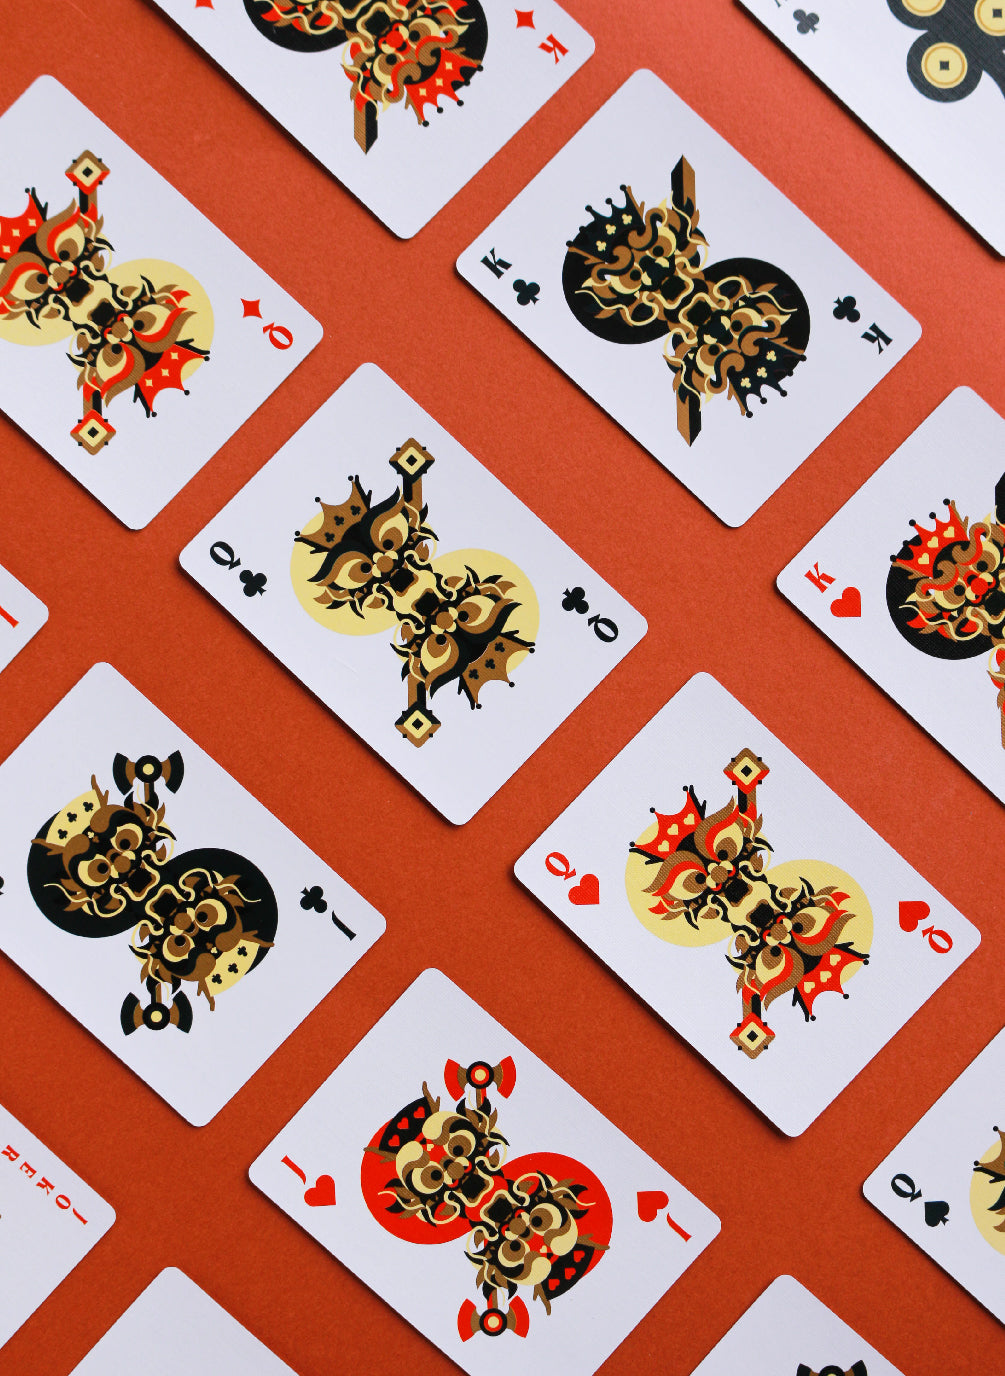 Imperial Lunar Playing Card ( GJH Group x Salang Design)